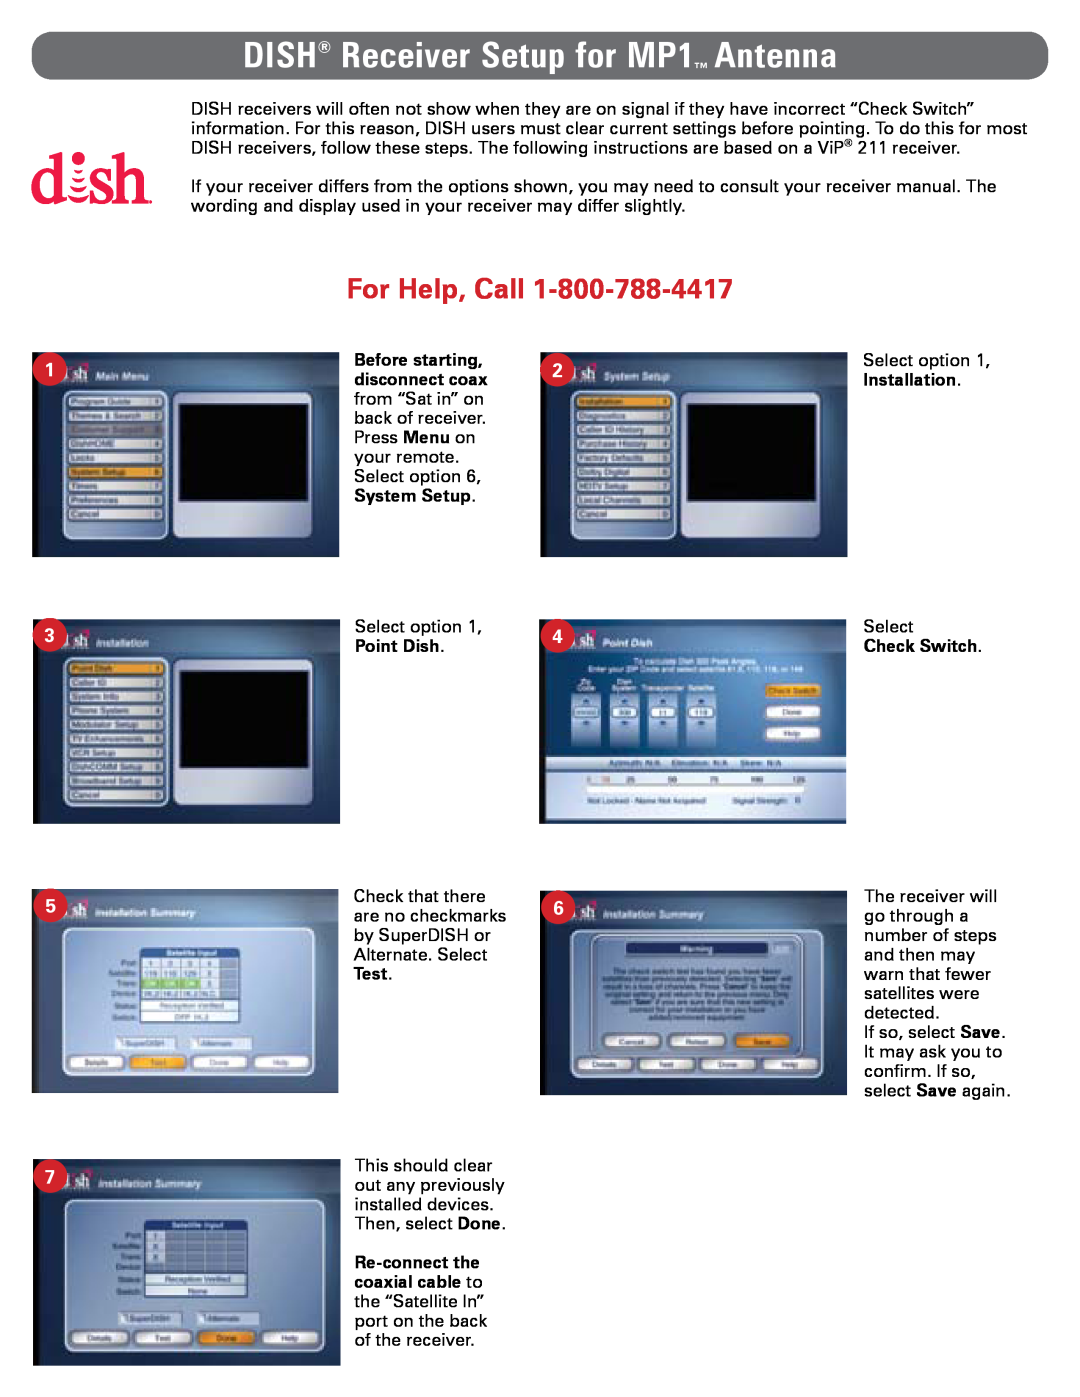 Dish Network MP1 manual Before starting, disconnect coax, System Setup, Point Dish, Test, Check Switch, For Help, Call 